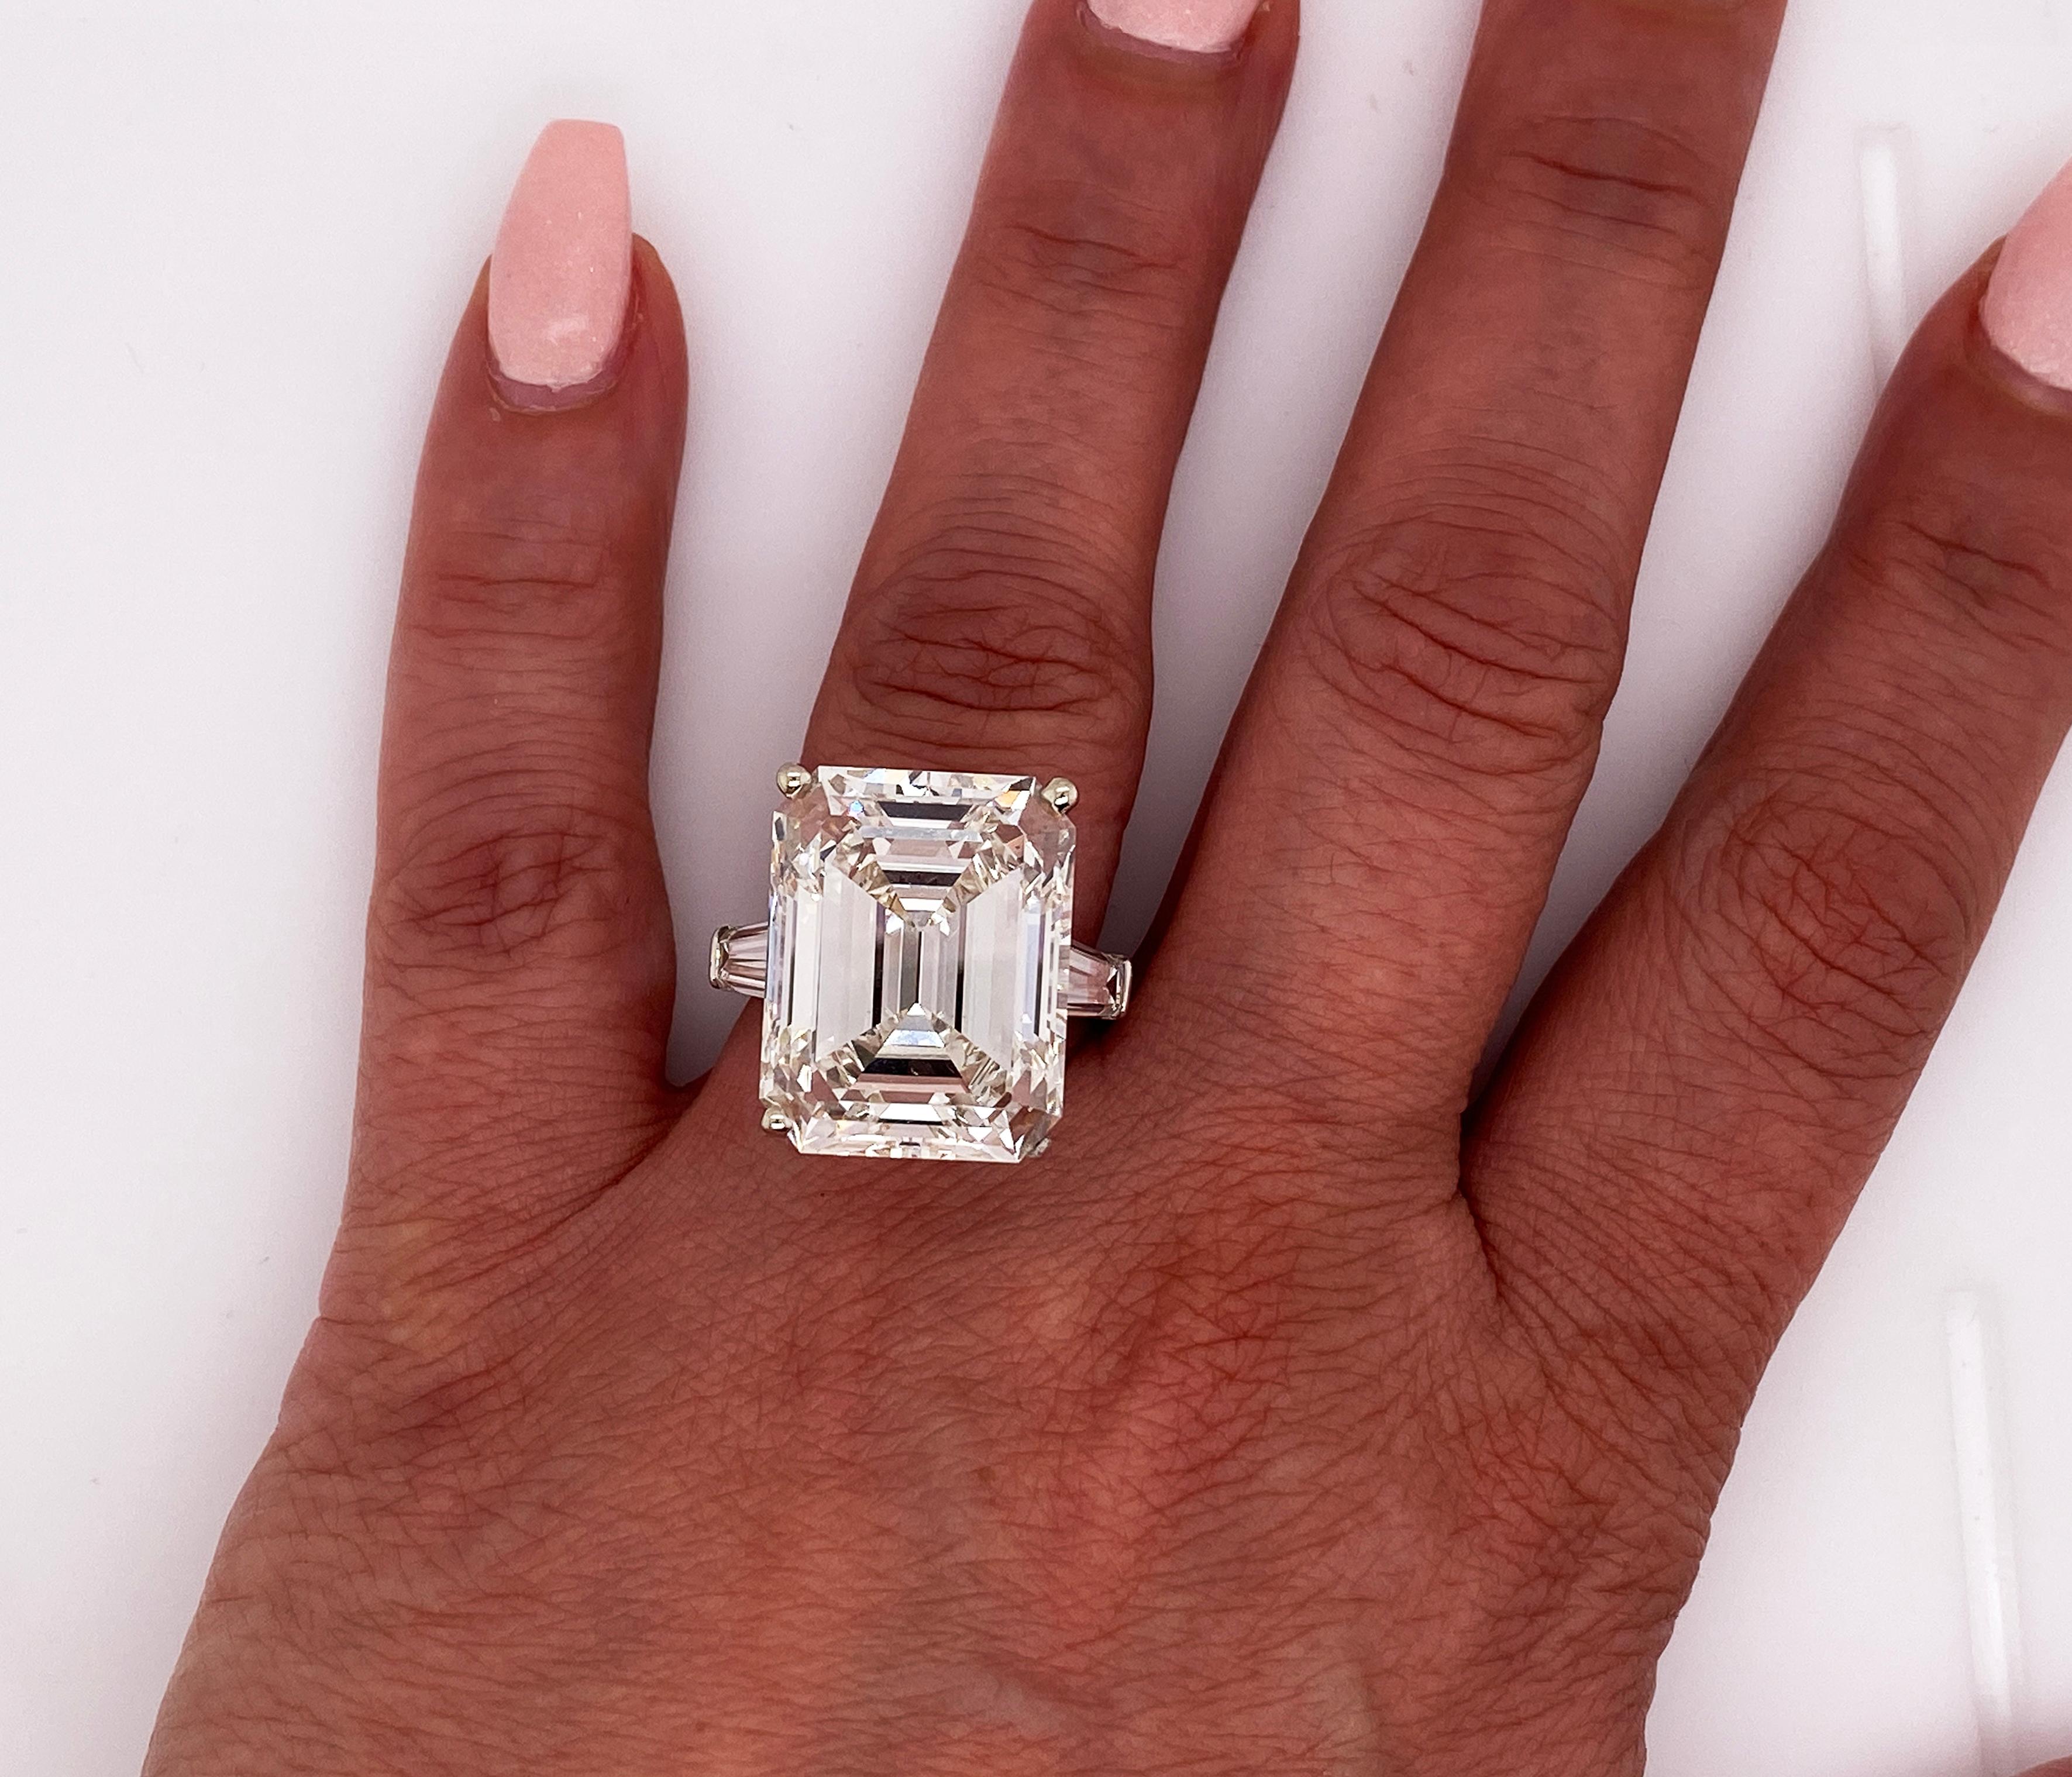 Harry Winston GIA Certified 24.19 carat J color, VS2 Clarity Emerald Cut Ring set in Platinum with two baguette-cut diamonds

An incredible ring by Harry Winston, famous American jeweler. The 24.19 carat diamond center is GIA certified Report #: